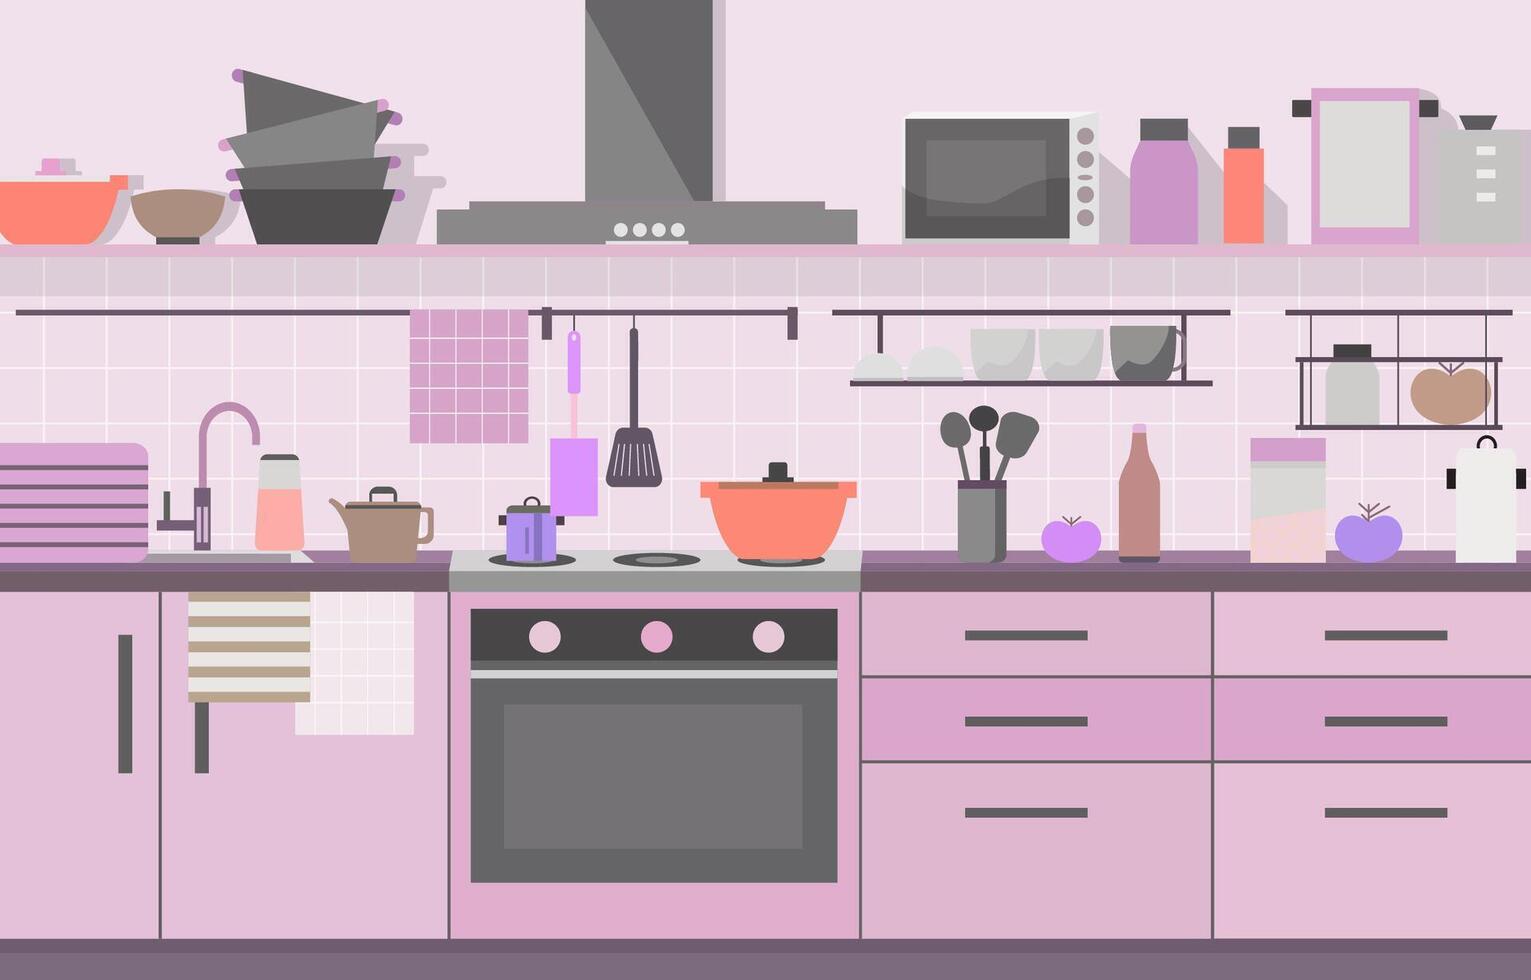 Flat Design of Modern Kitchen Interior in Restaurant with Storage Shelves and Stove vector